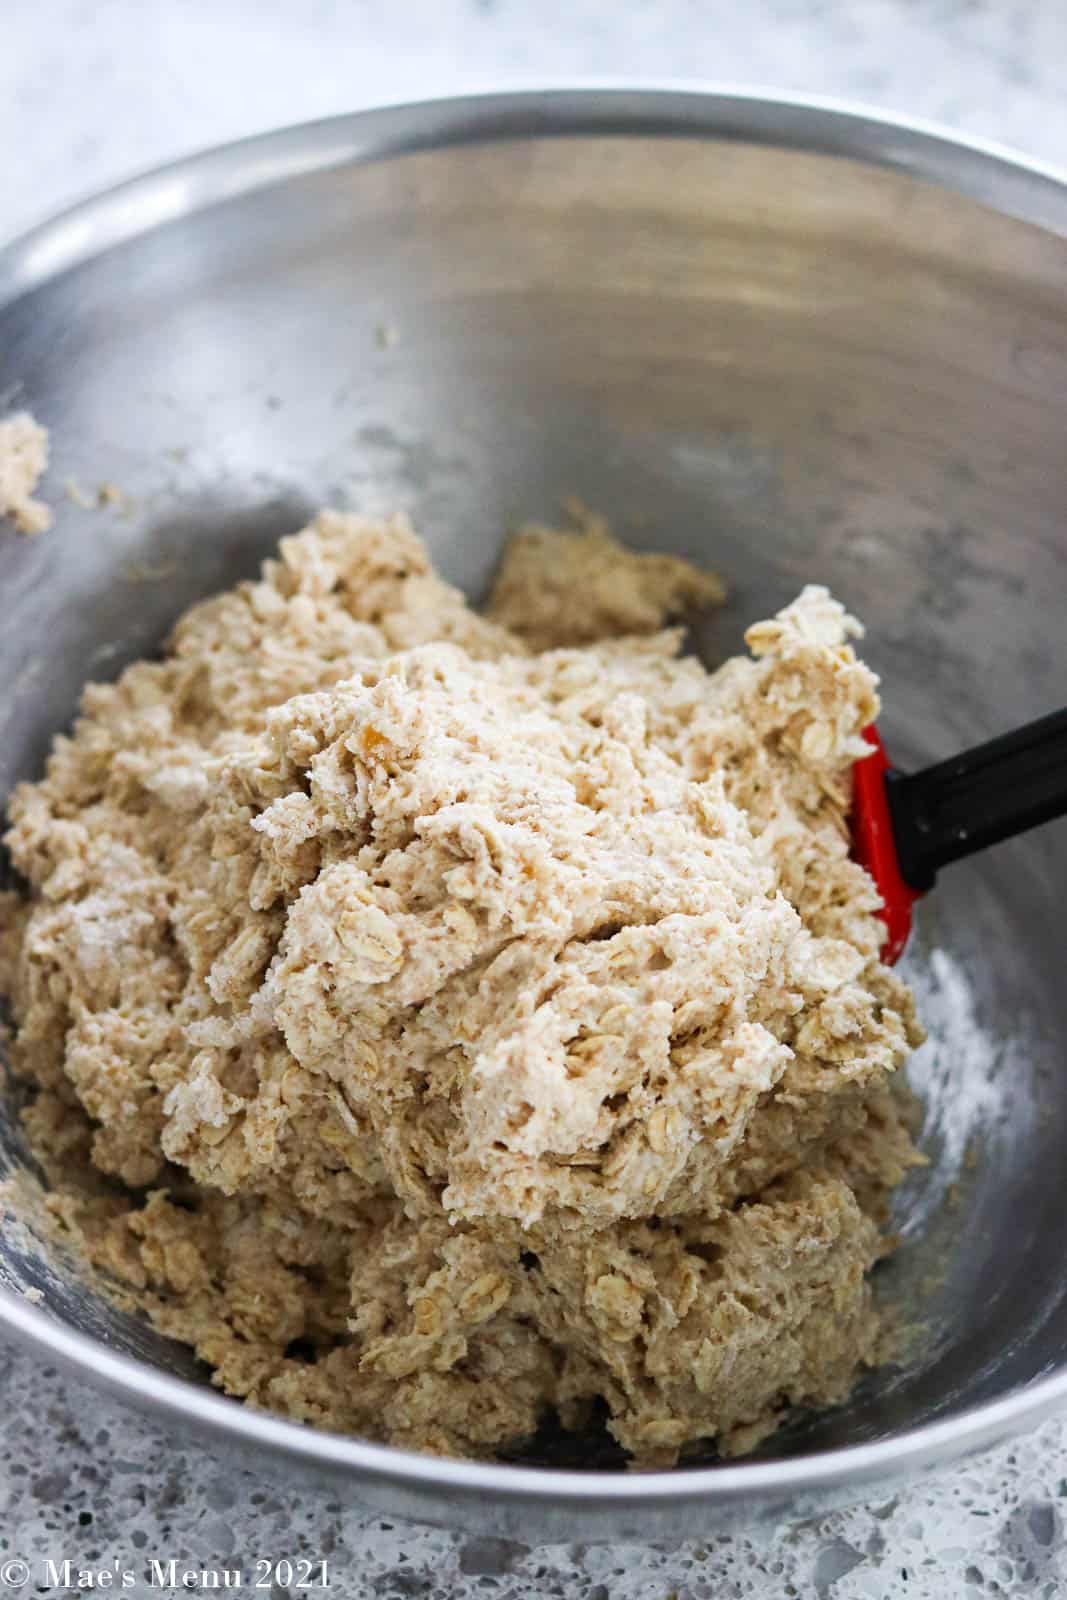 A large mass of oatmeal bread dough in a mixing bowl